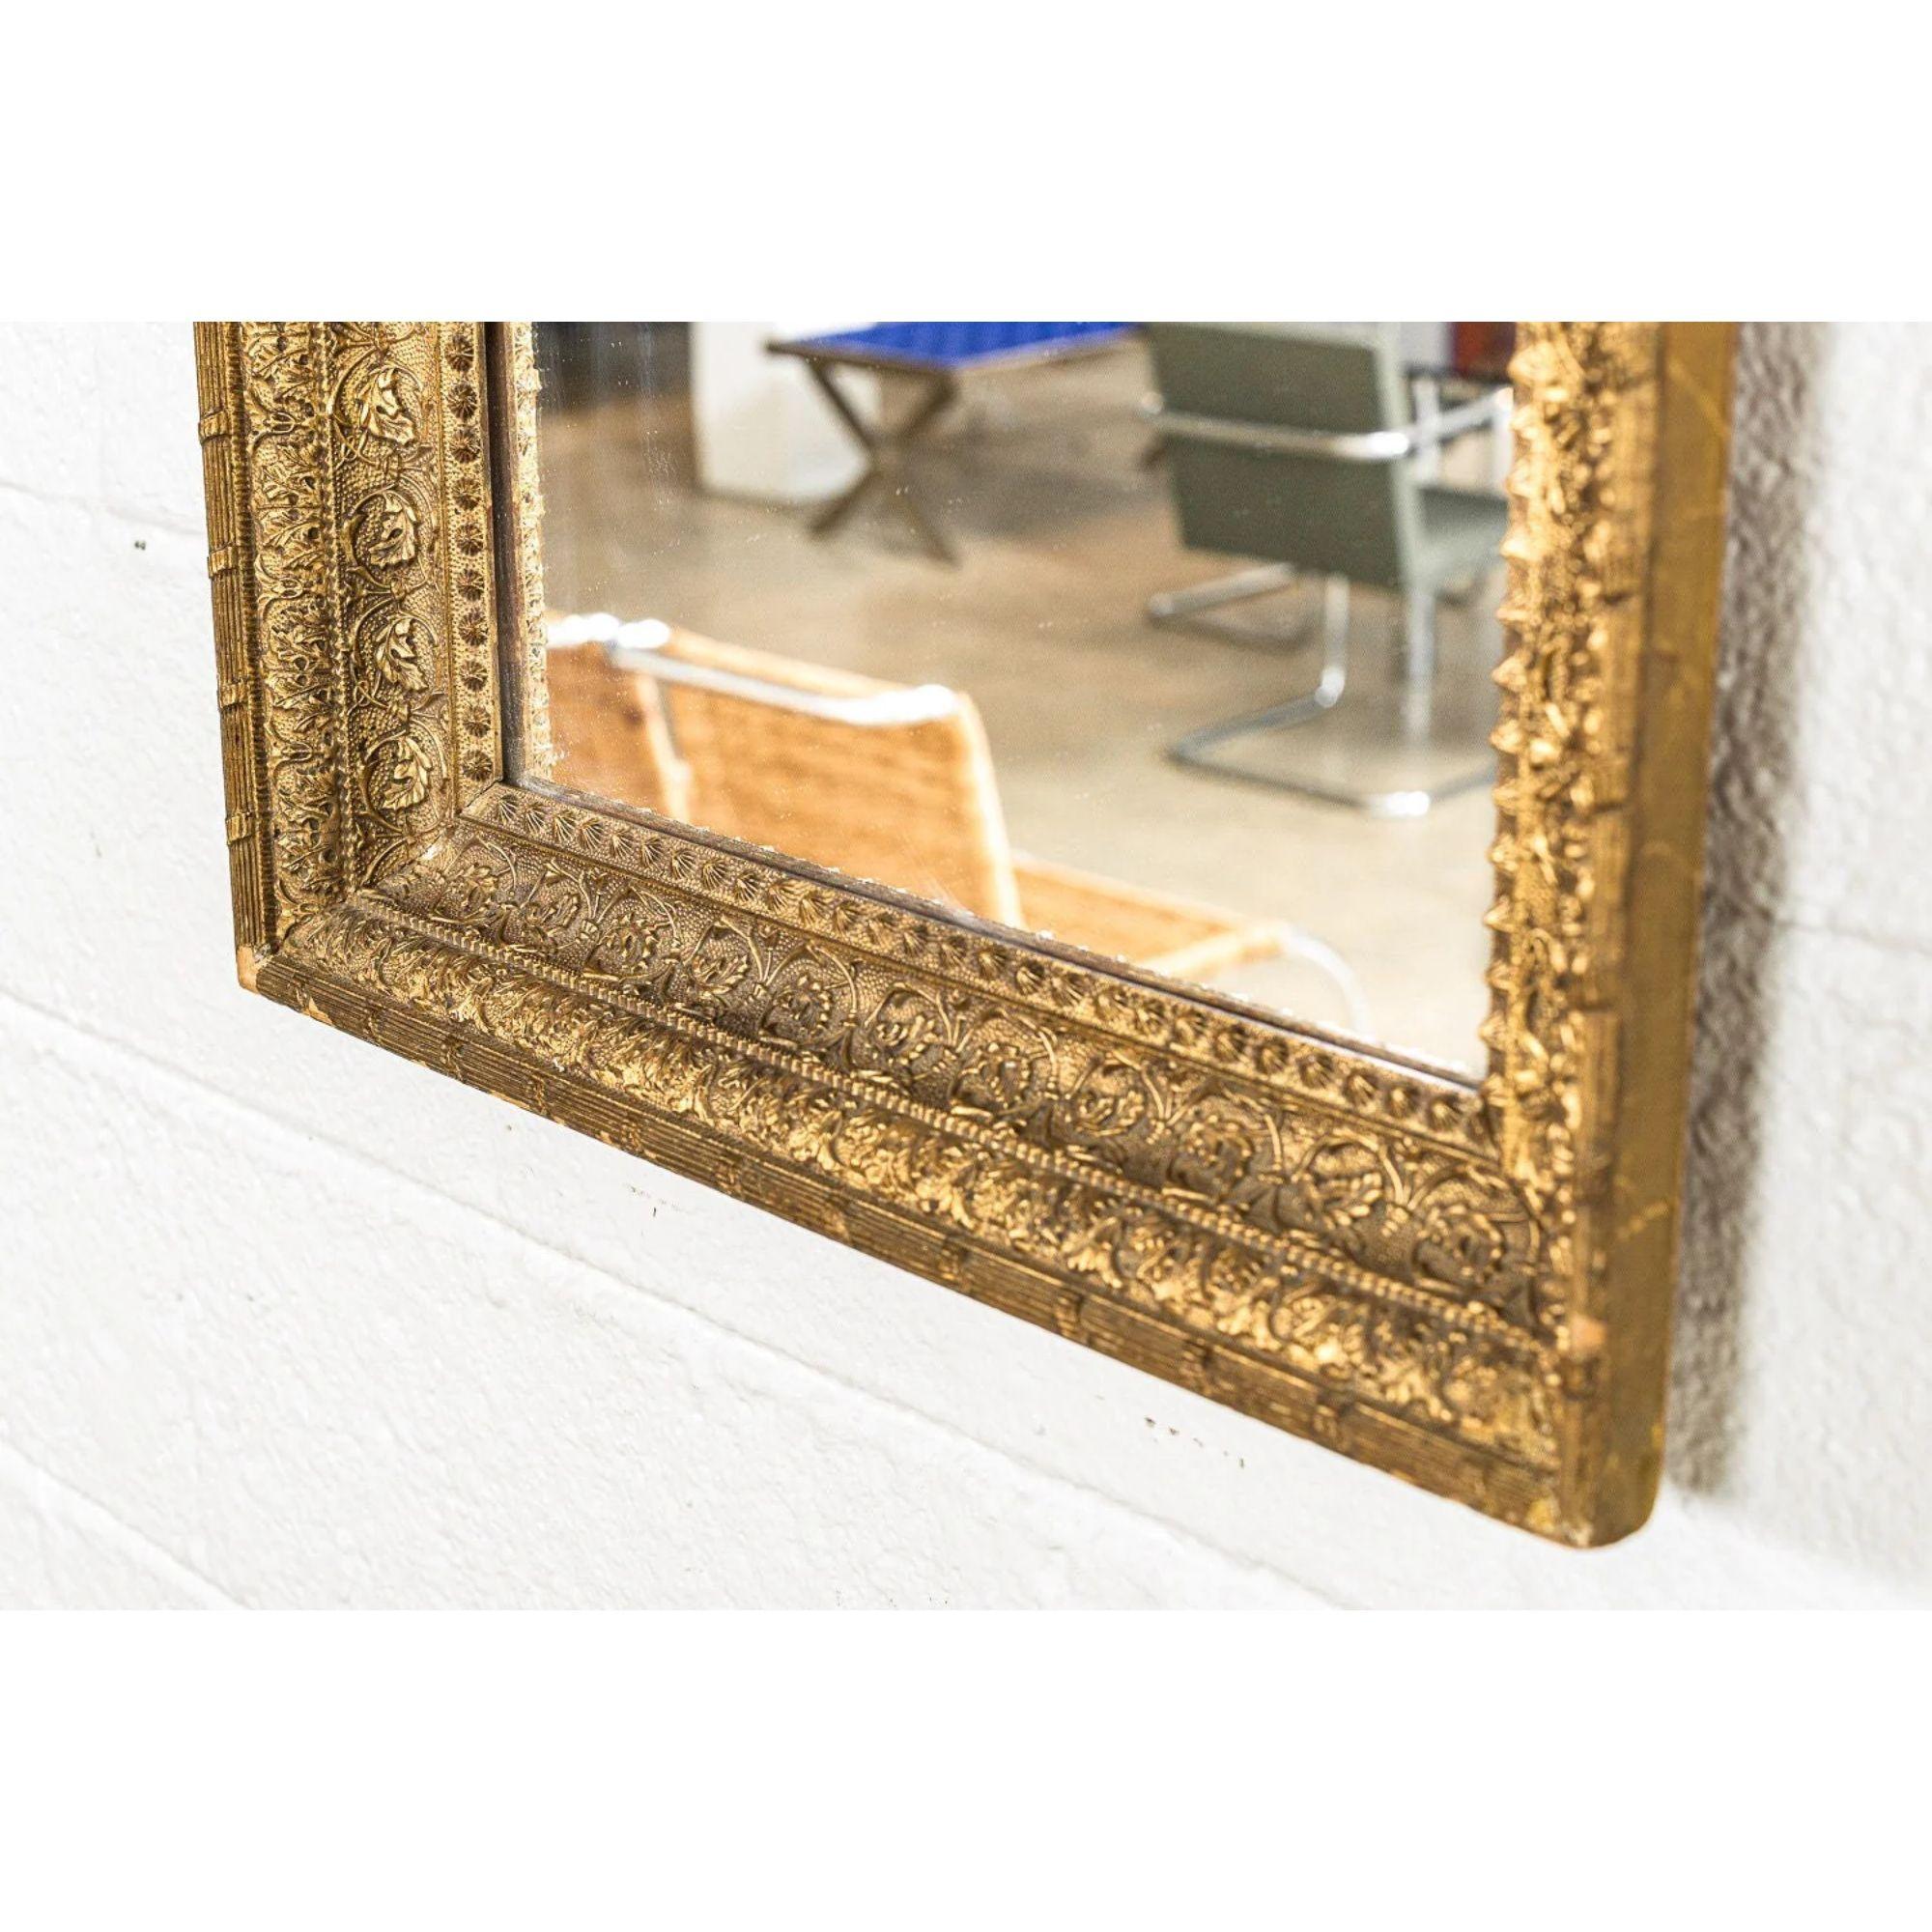 Painted Vintage Antique Ornate Gold Decorative Hanging Wall Mirror For Sale